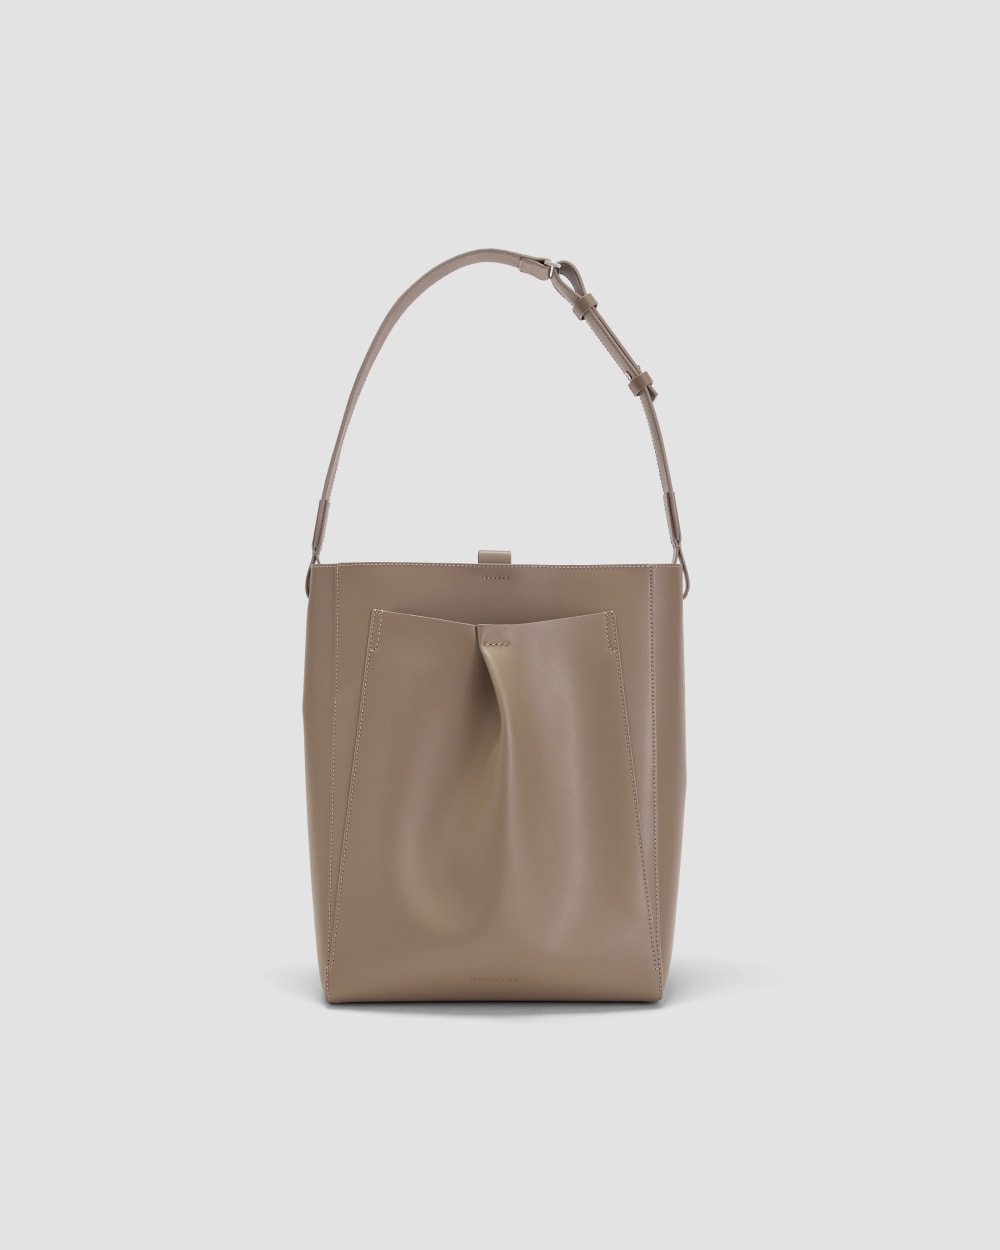 Everlane 'The Boss Bag' Review + A Holiday Giveaway! - Jeans and a Teacup